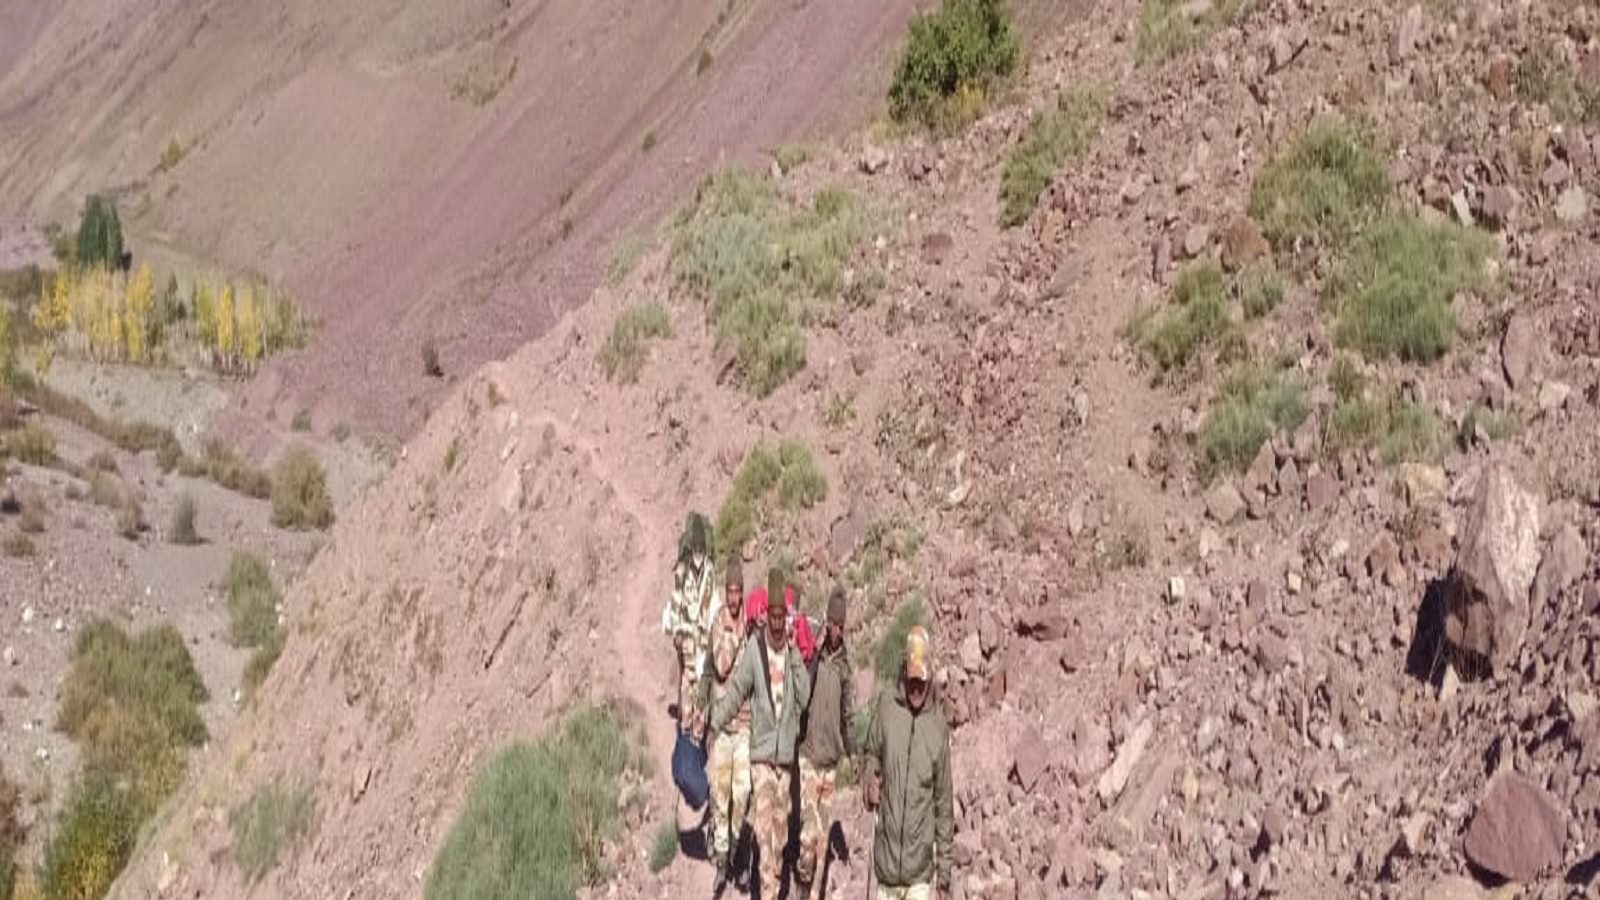 Lahaul-Spiti: ITBP jawans brought down the bodies of two mountain trekkers on foot stretcher for 27 km in difficult conditions - Evening News